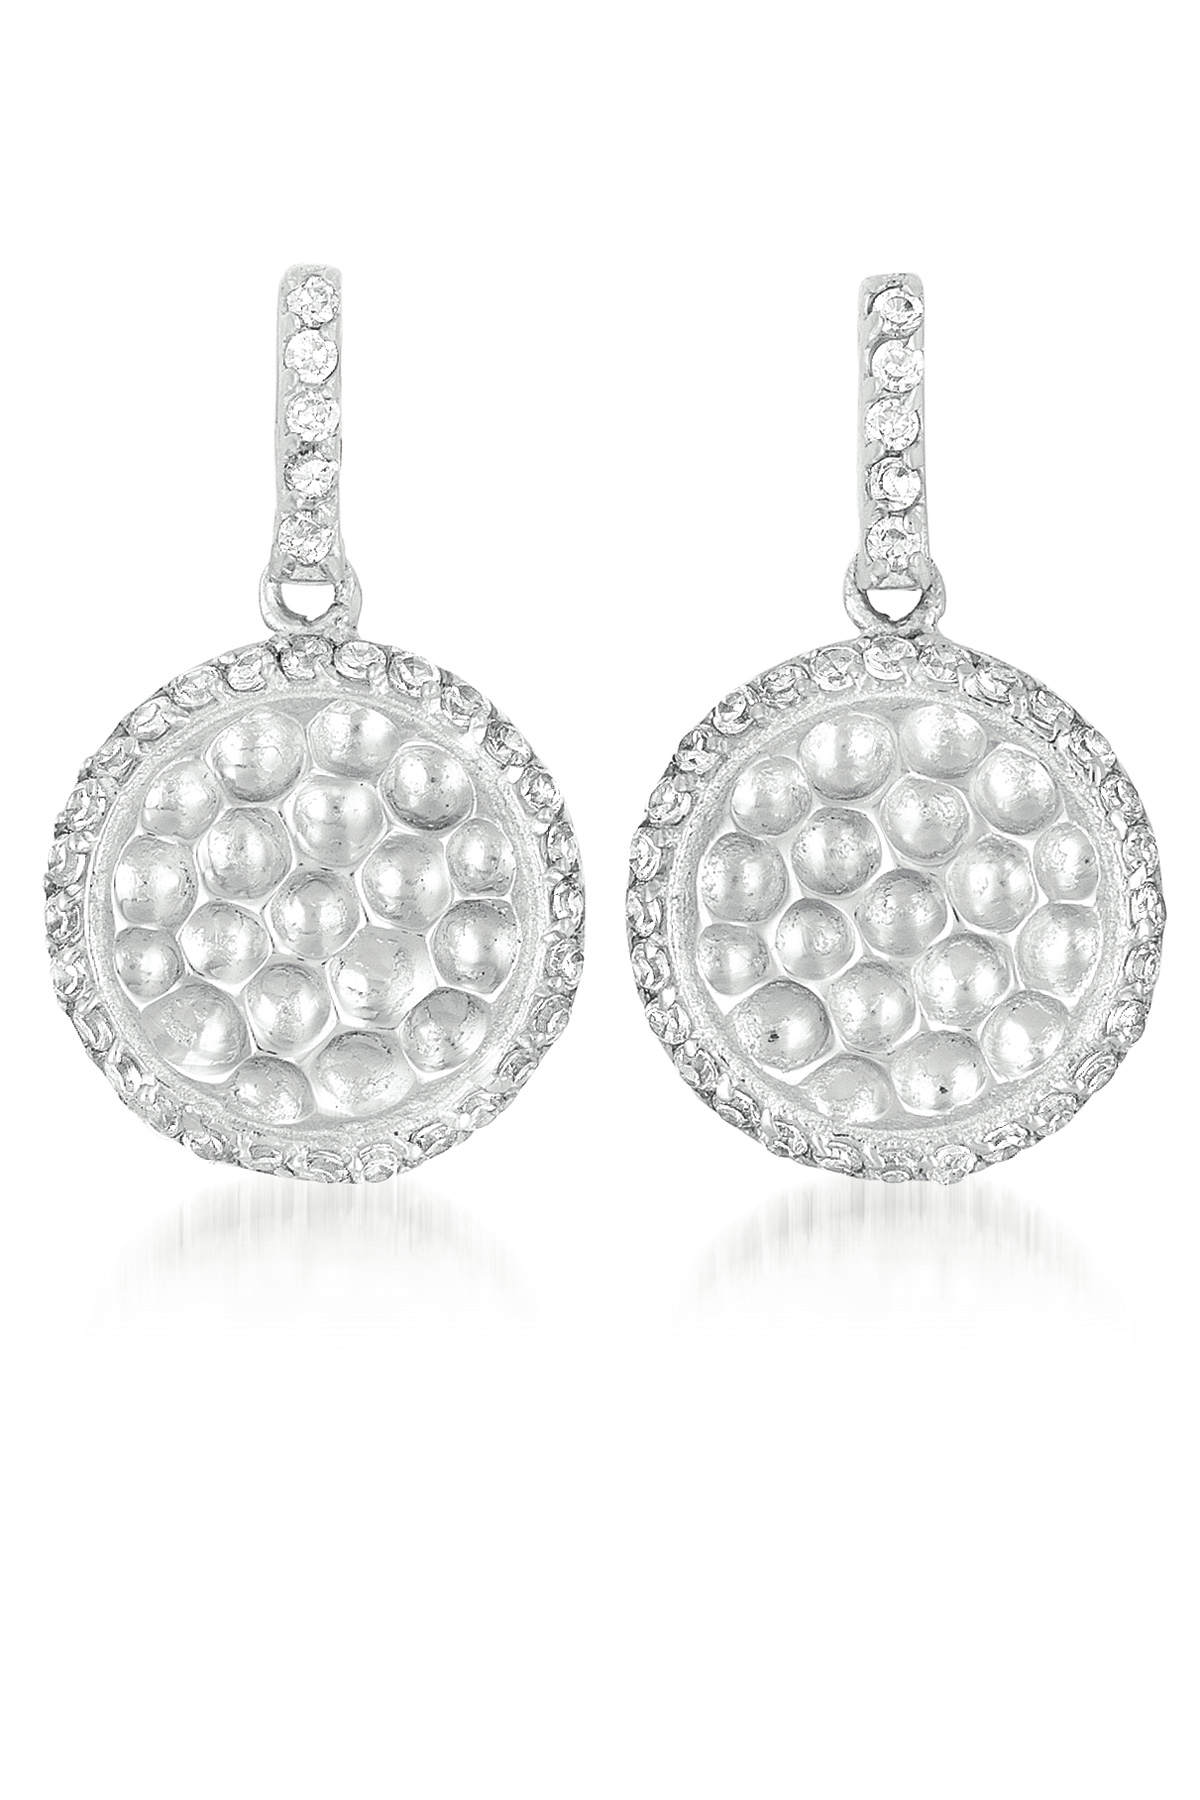 Cubic Zirconia (.925) Sterling Silver Rhodium Plated Hammered Round Drop Earrings